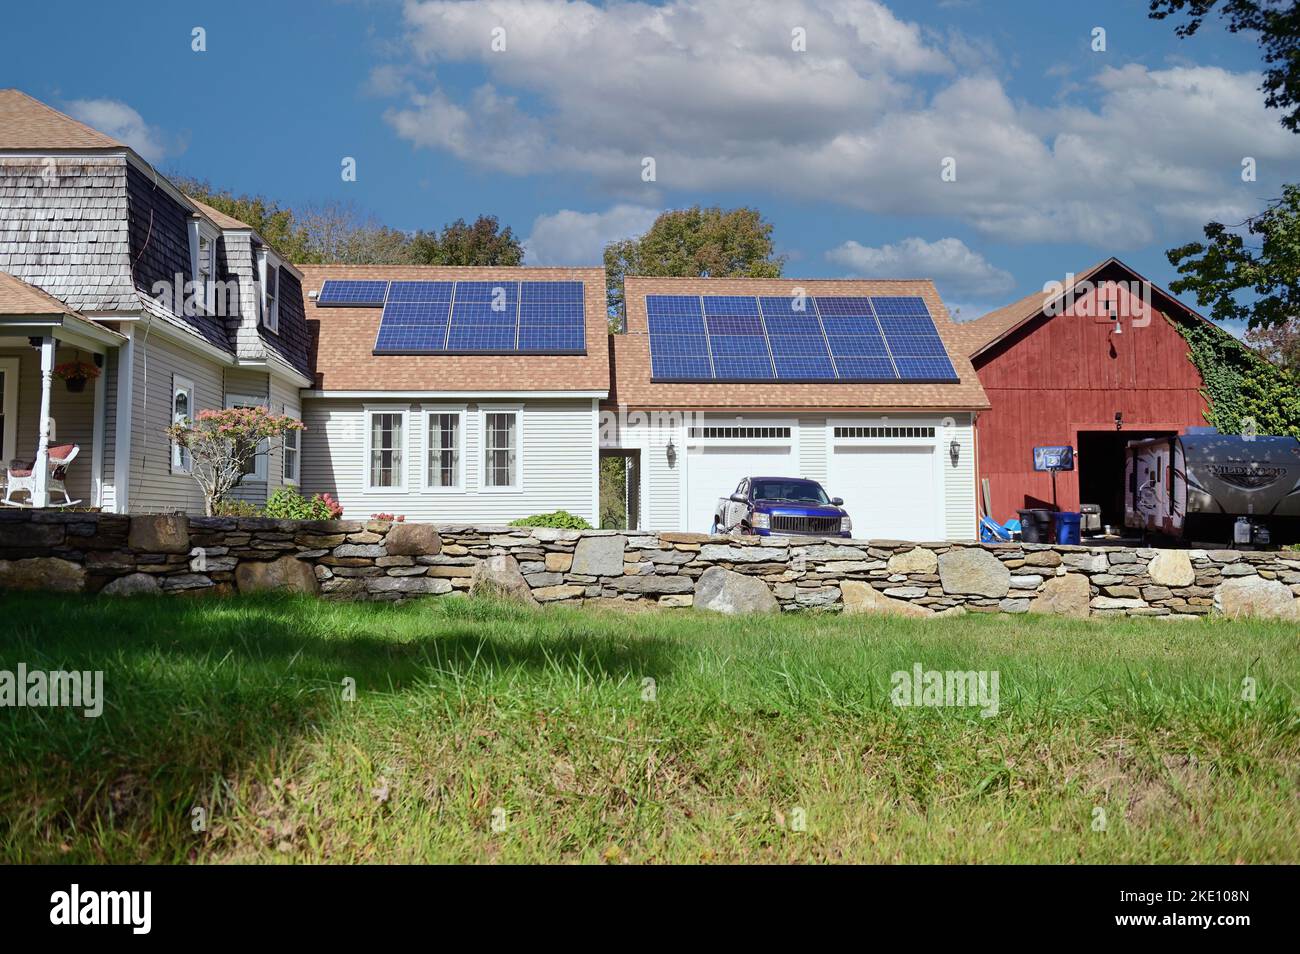 South Woodstock, Connecticut, USA. Solar panels installed in the roof of a garage and breezeway structure at a rural home. Stock Photo